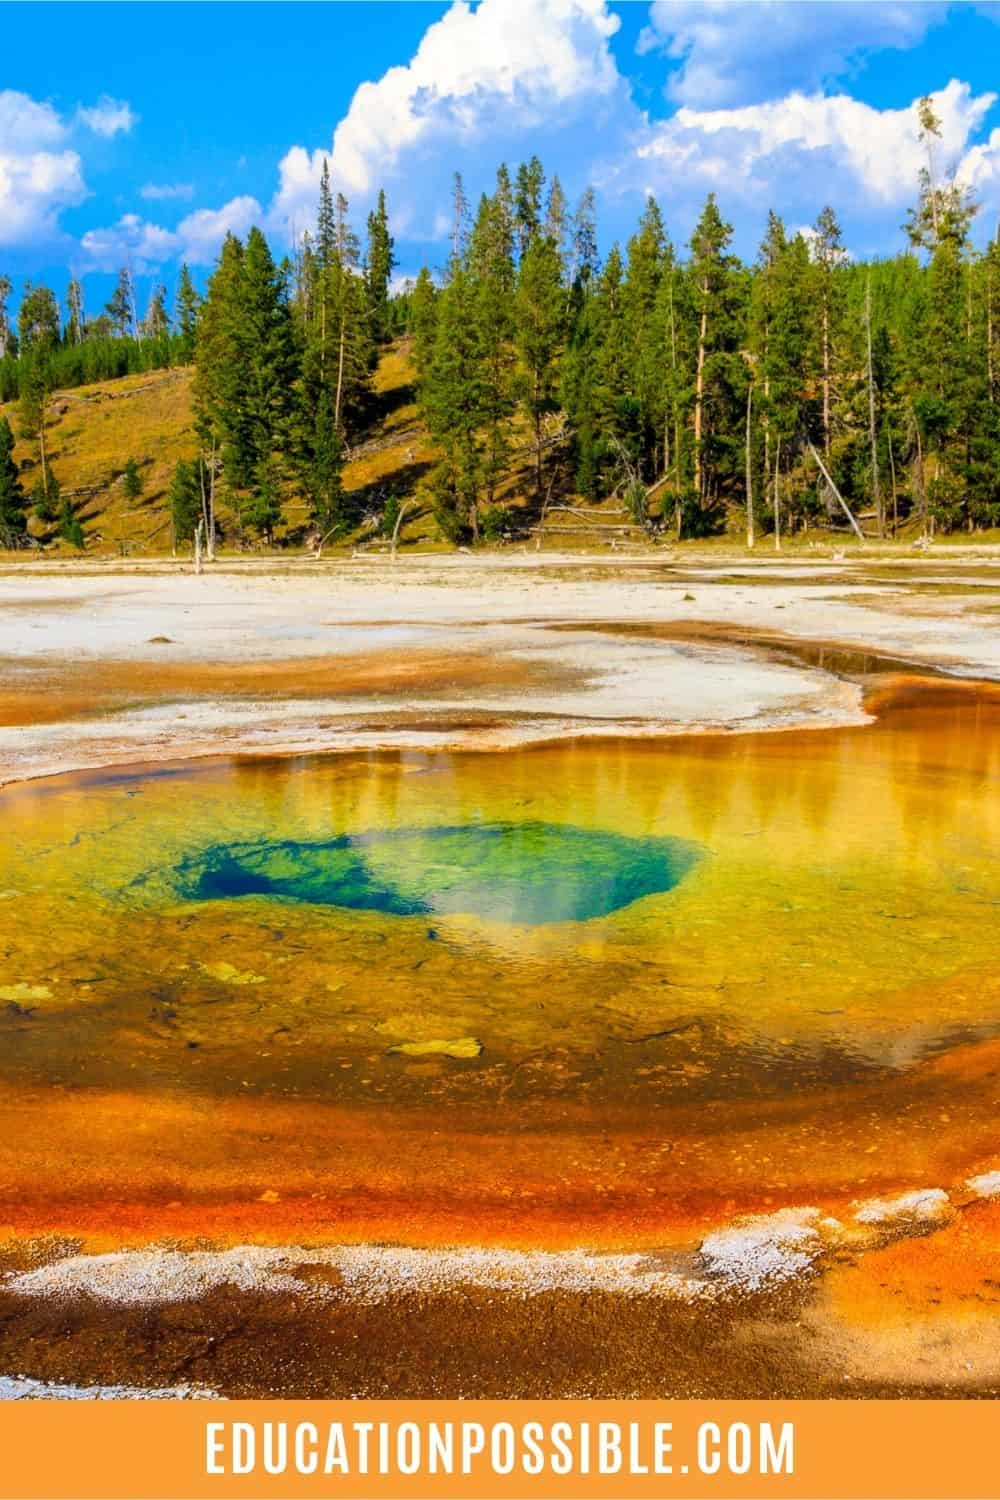 Chromatic pool in Yellowstone National Park